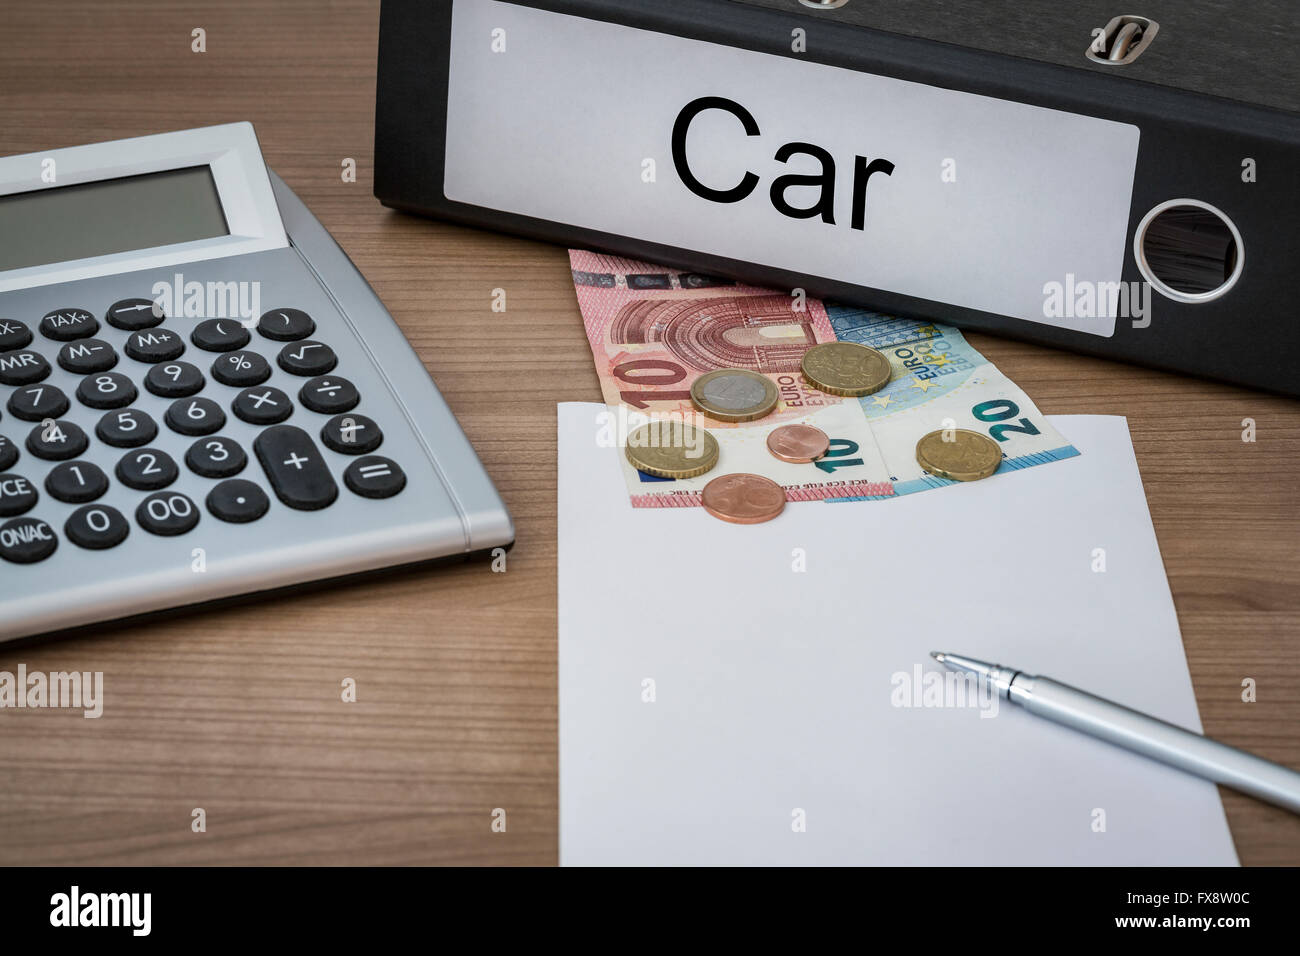 Car written on a binder on a desk with euro money calculator blank sheet and pen Stock Photo